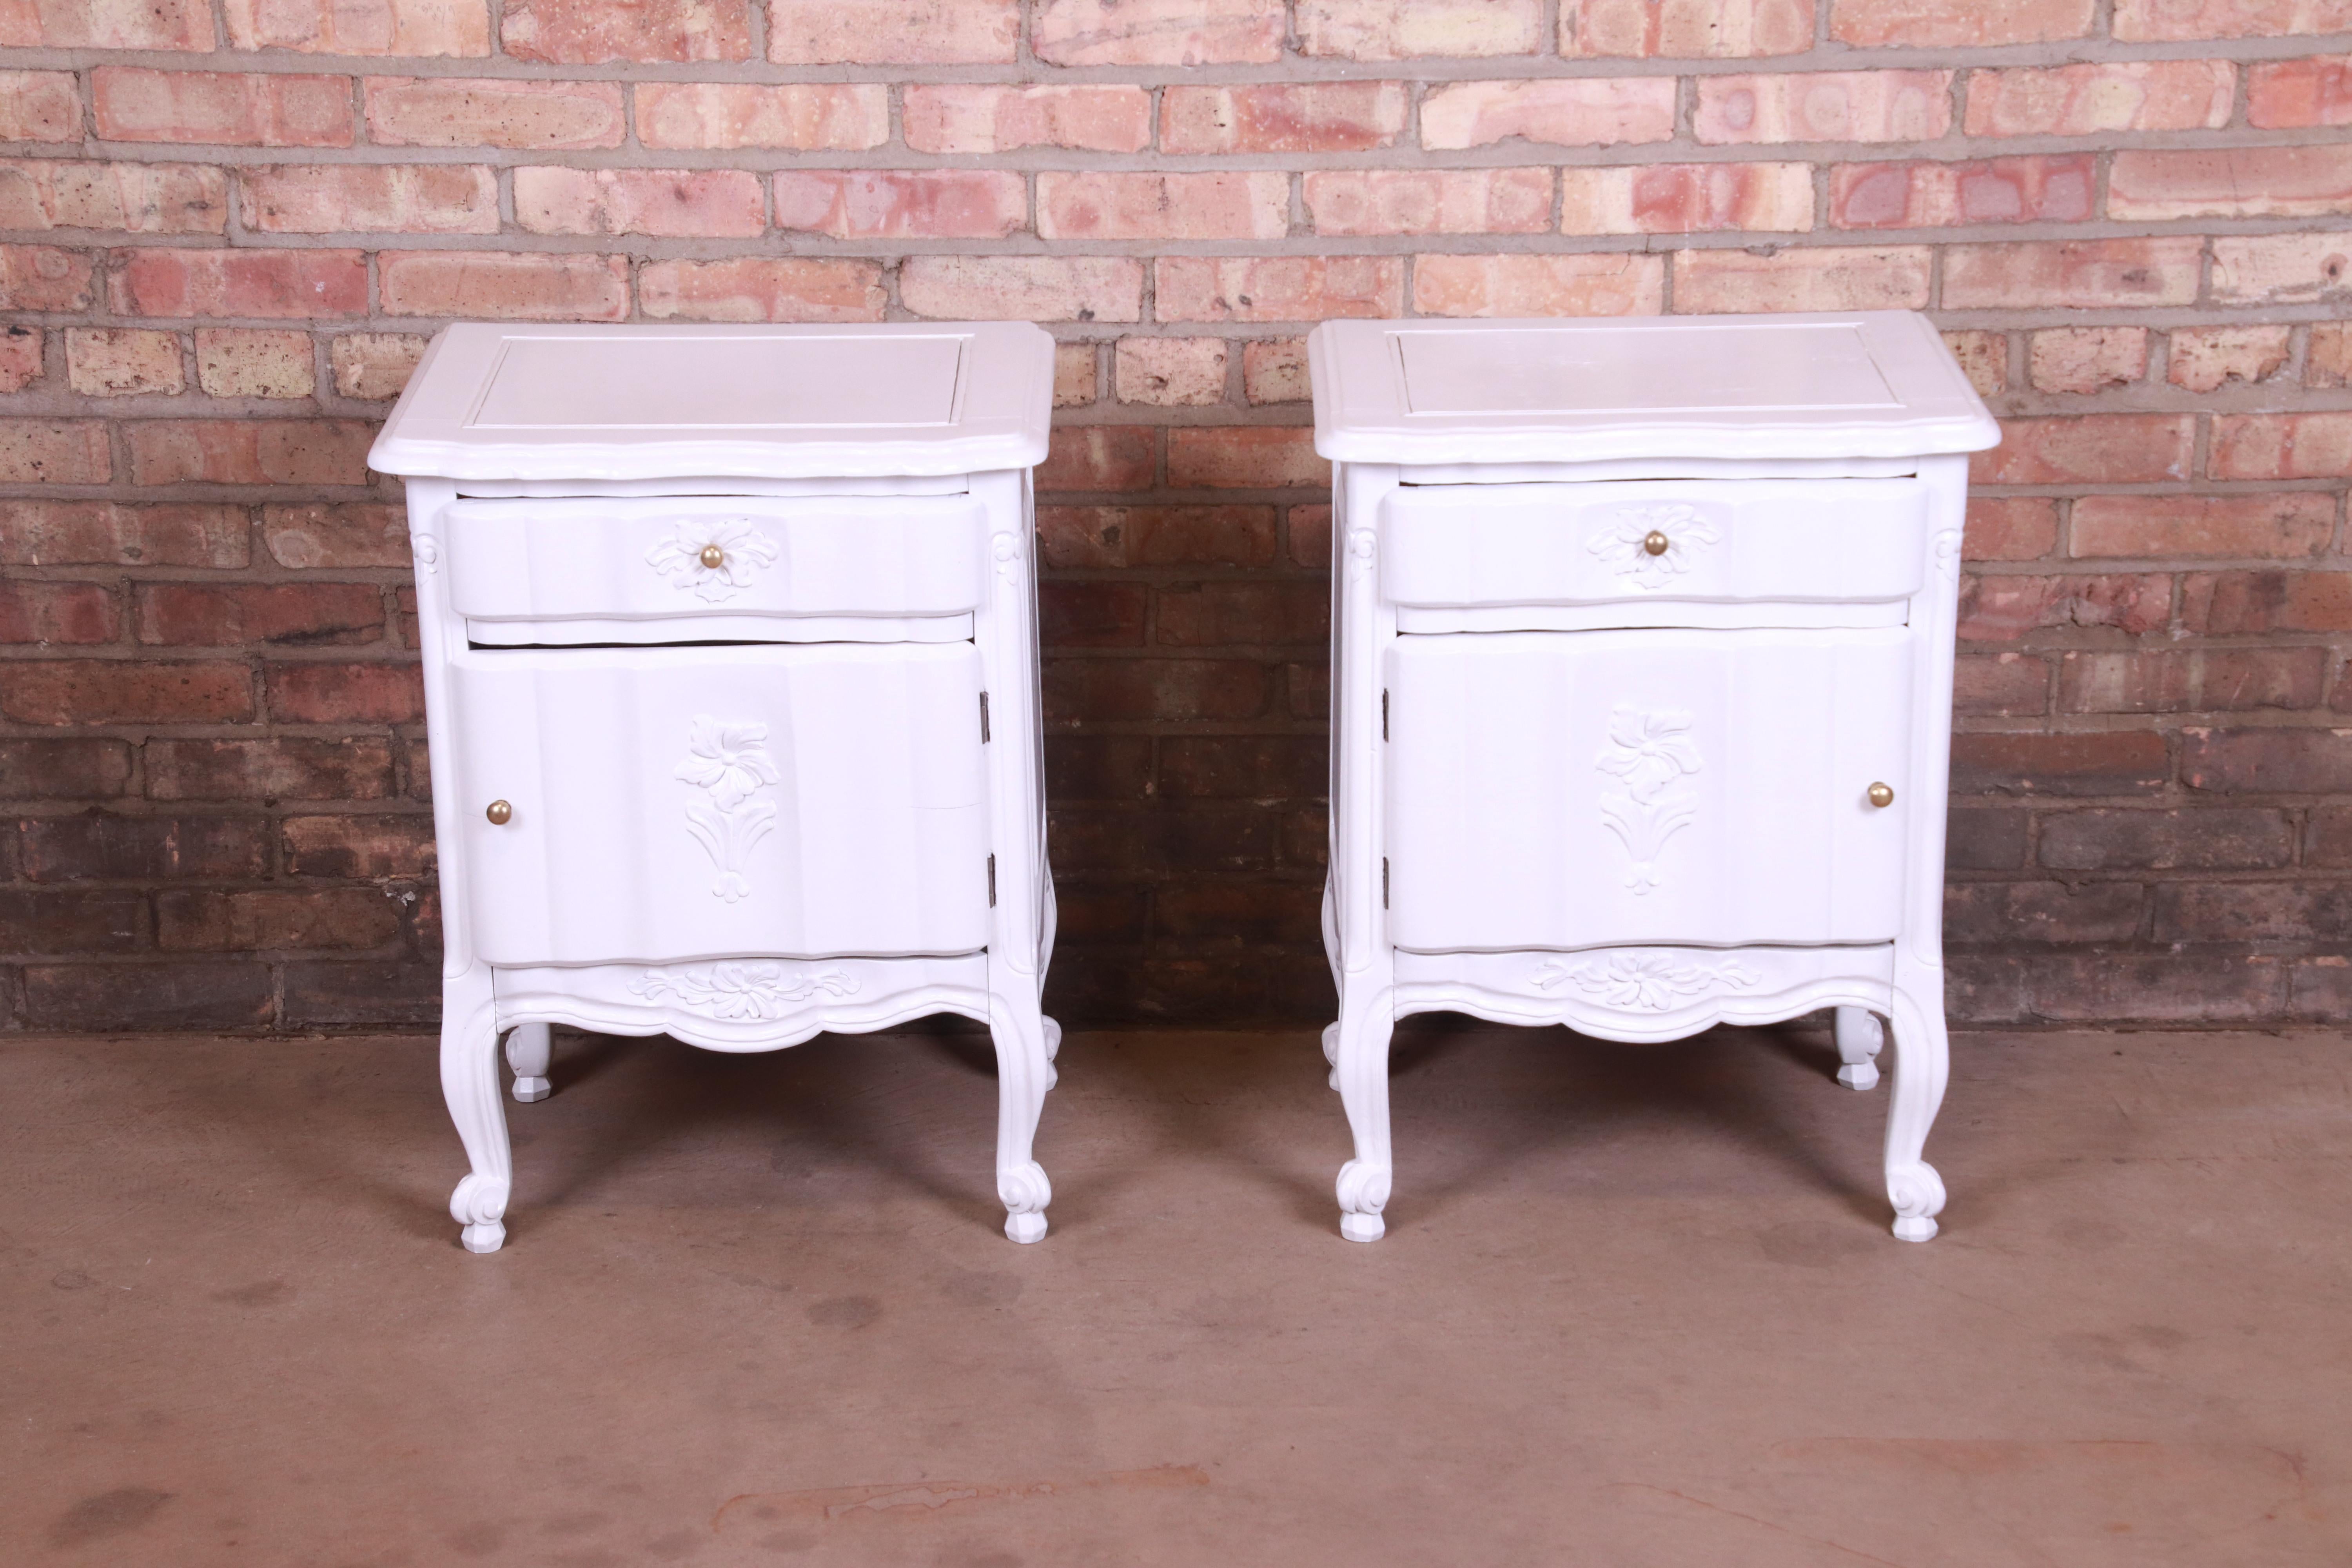 A gorgeous pair of antique French Provincial Louis XV nightstands

Circa 1920s

Carved white lacquered wood, with floral details and brass hardware.

Measures: 19.88